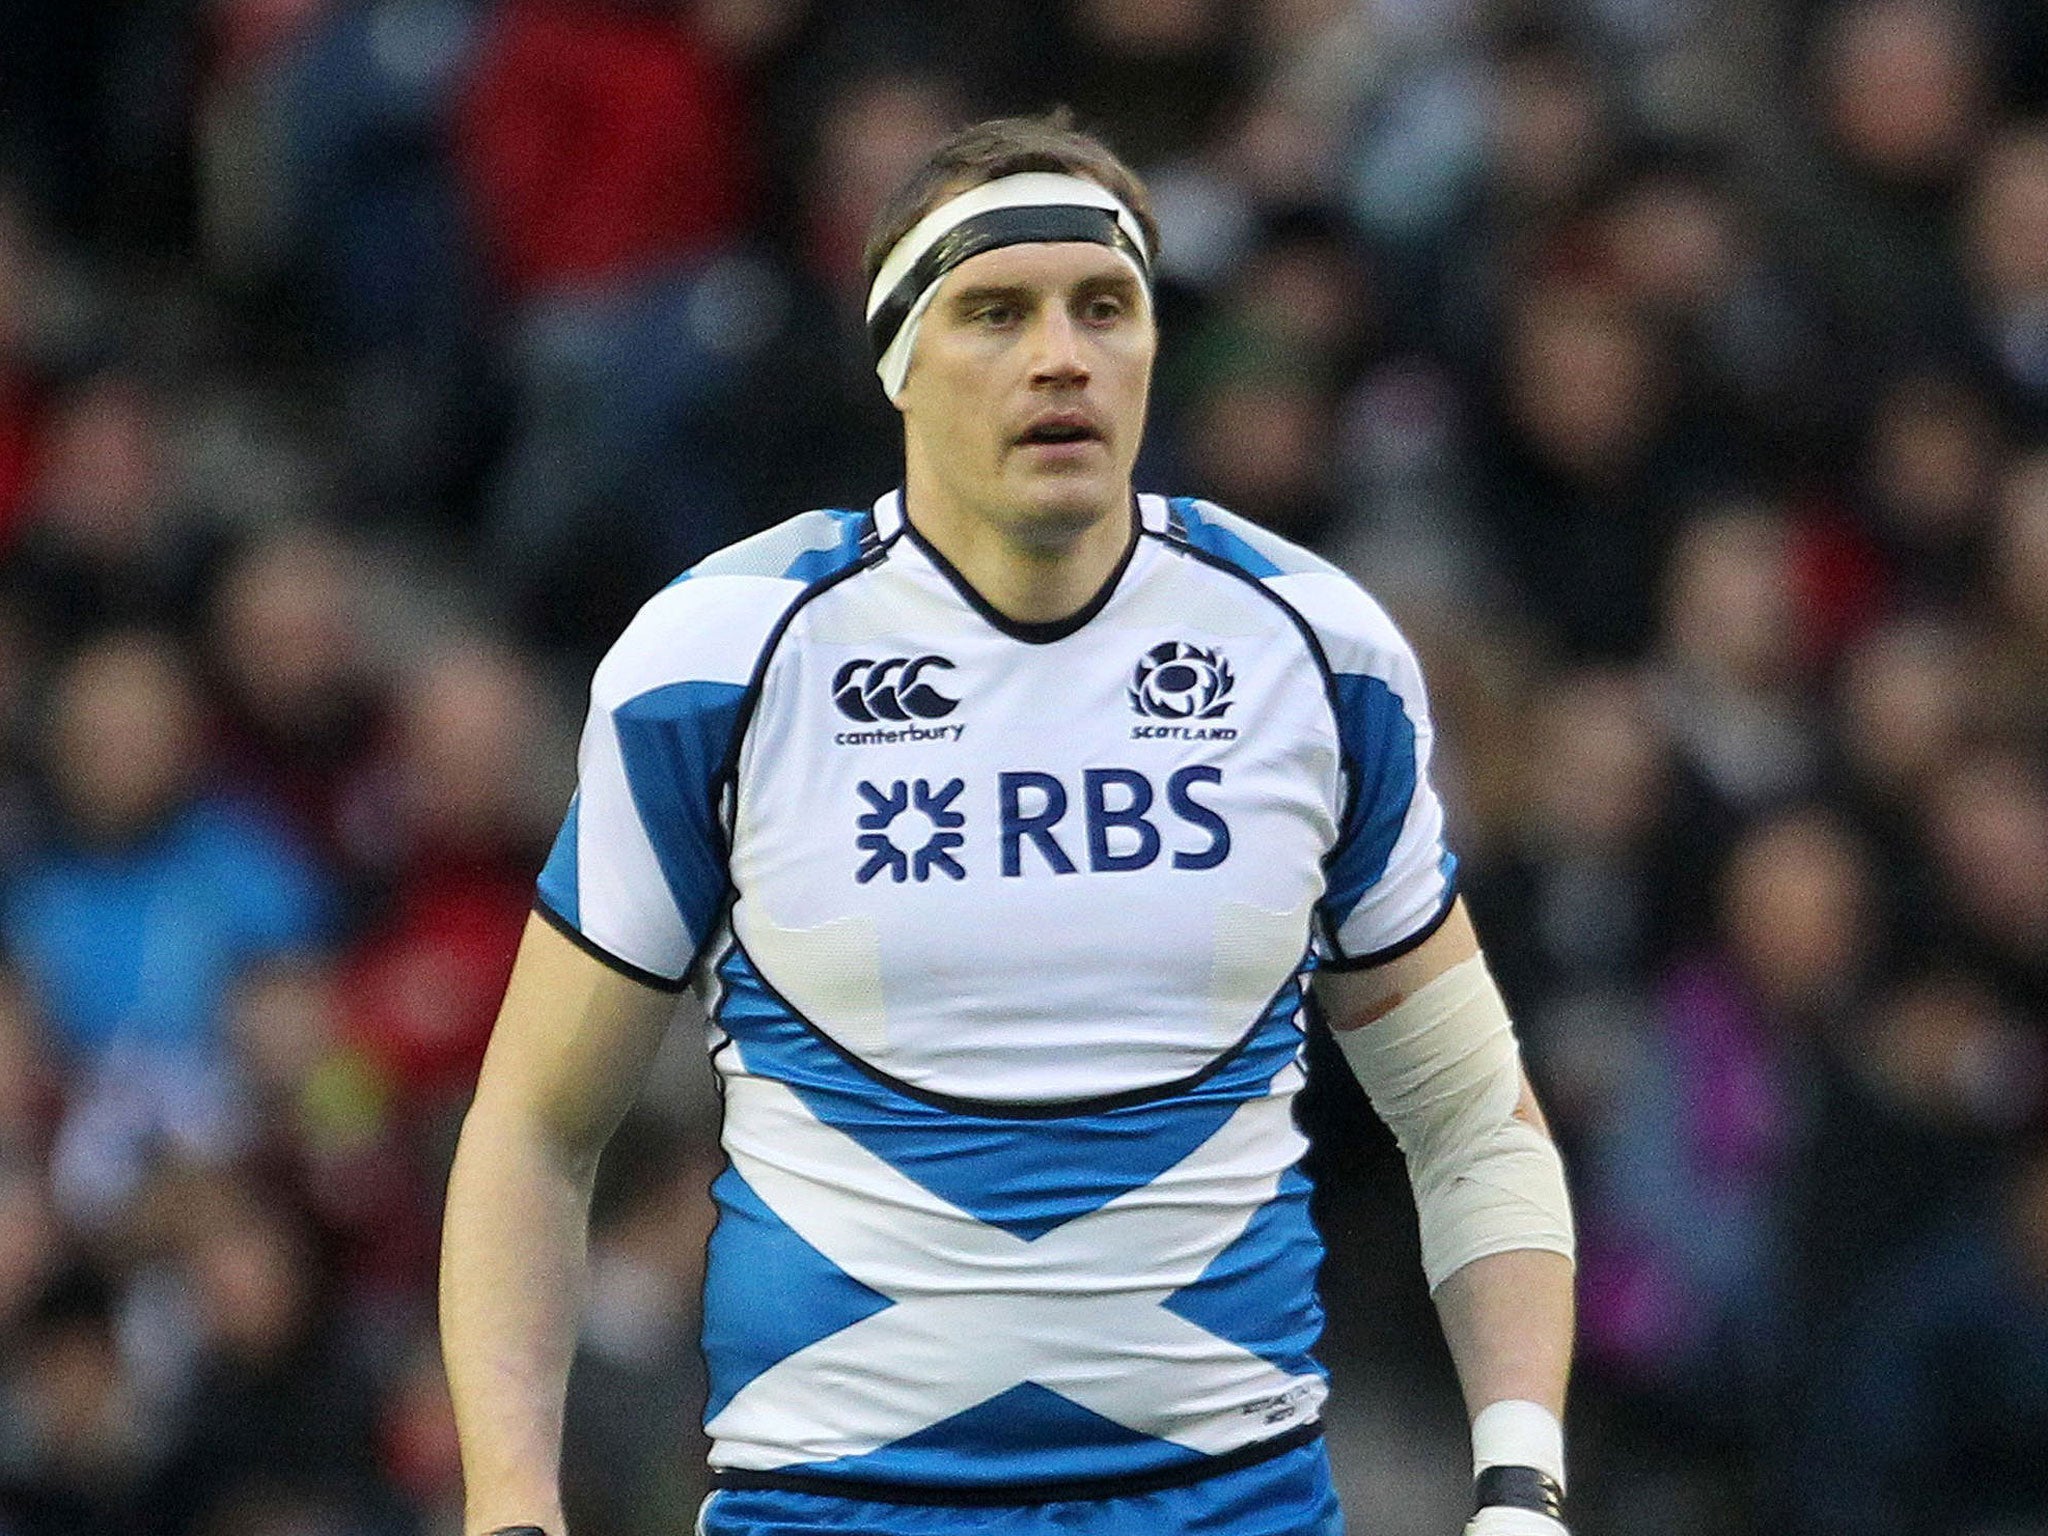 Scotland lock Alastair Kellock will miss the Six Nations after undergoing surgery on an arm injury